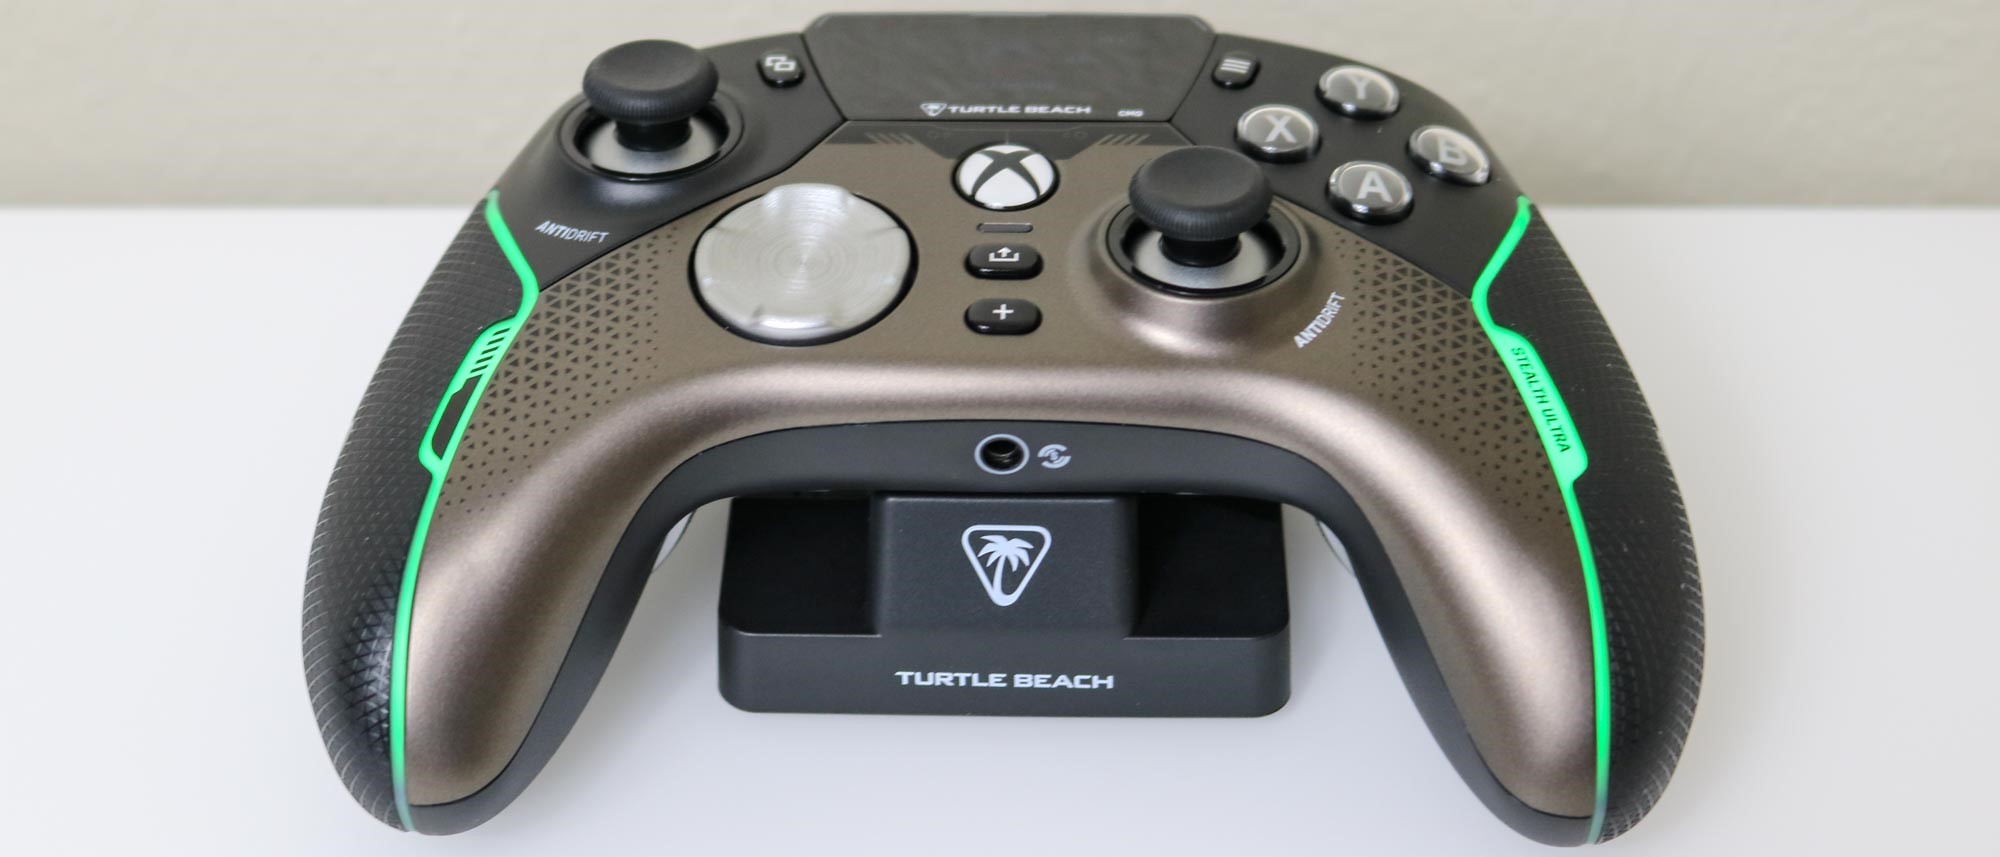 Turtle Beach Stealth Ultra Wireless Controller with charge dock